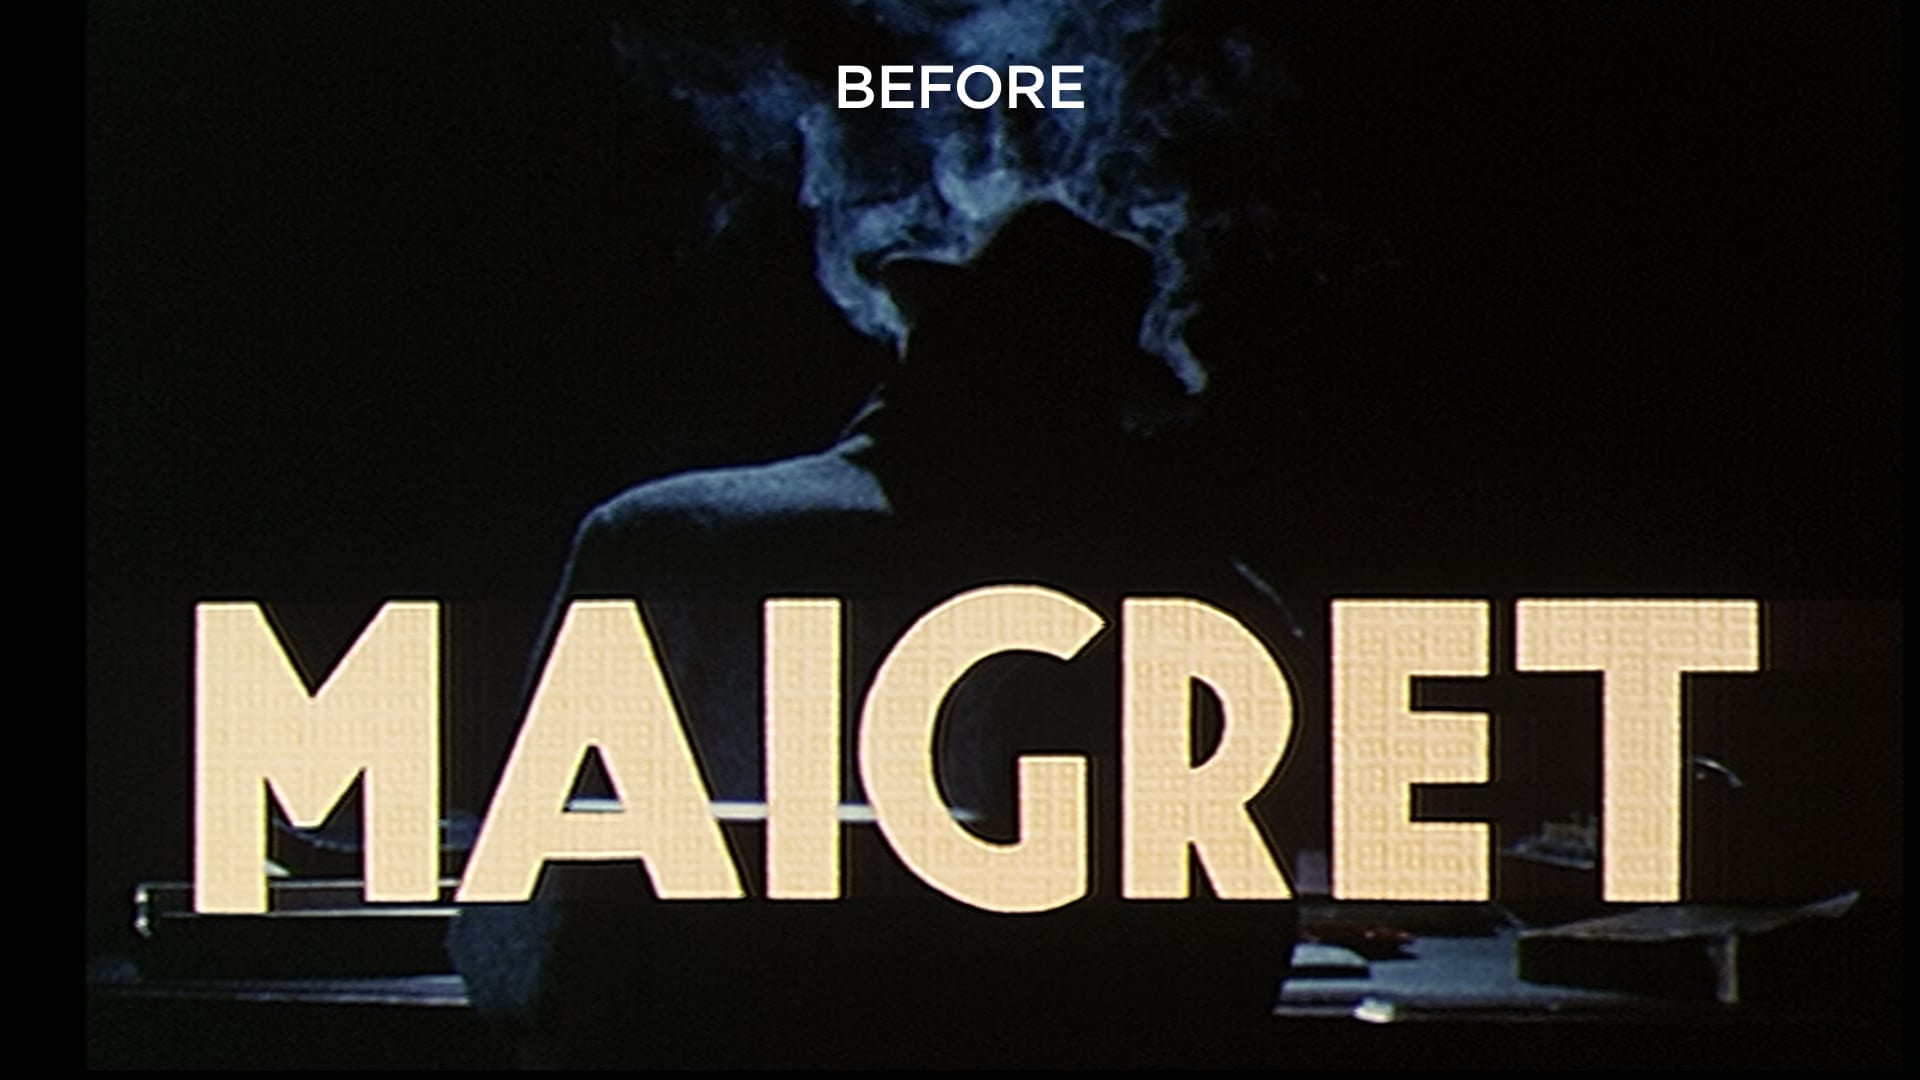 MAIGRET BEFORE AFTER SPLIT PIC before2